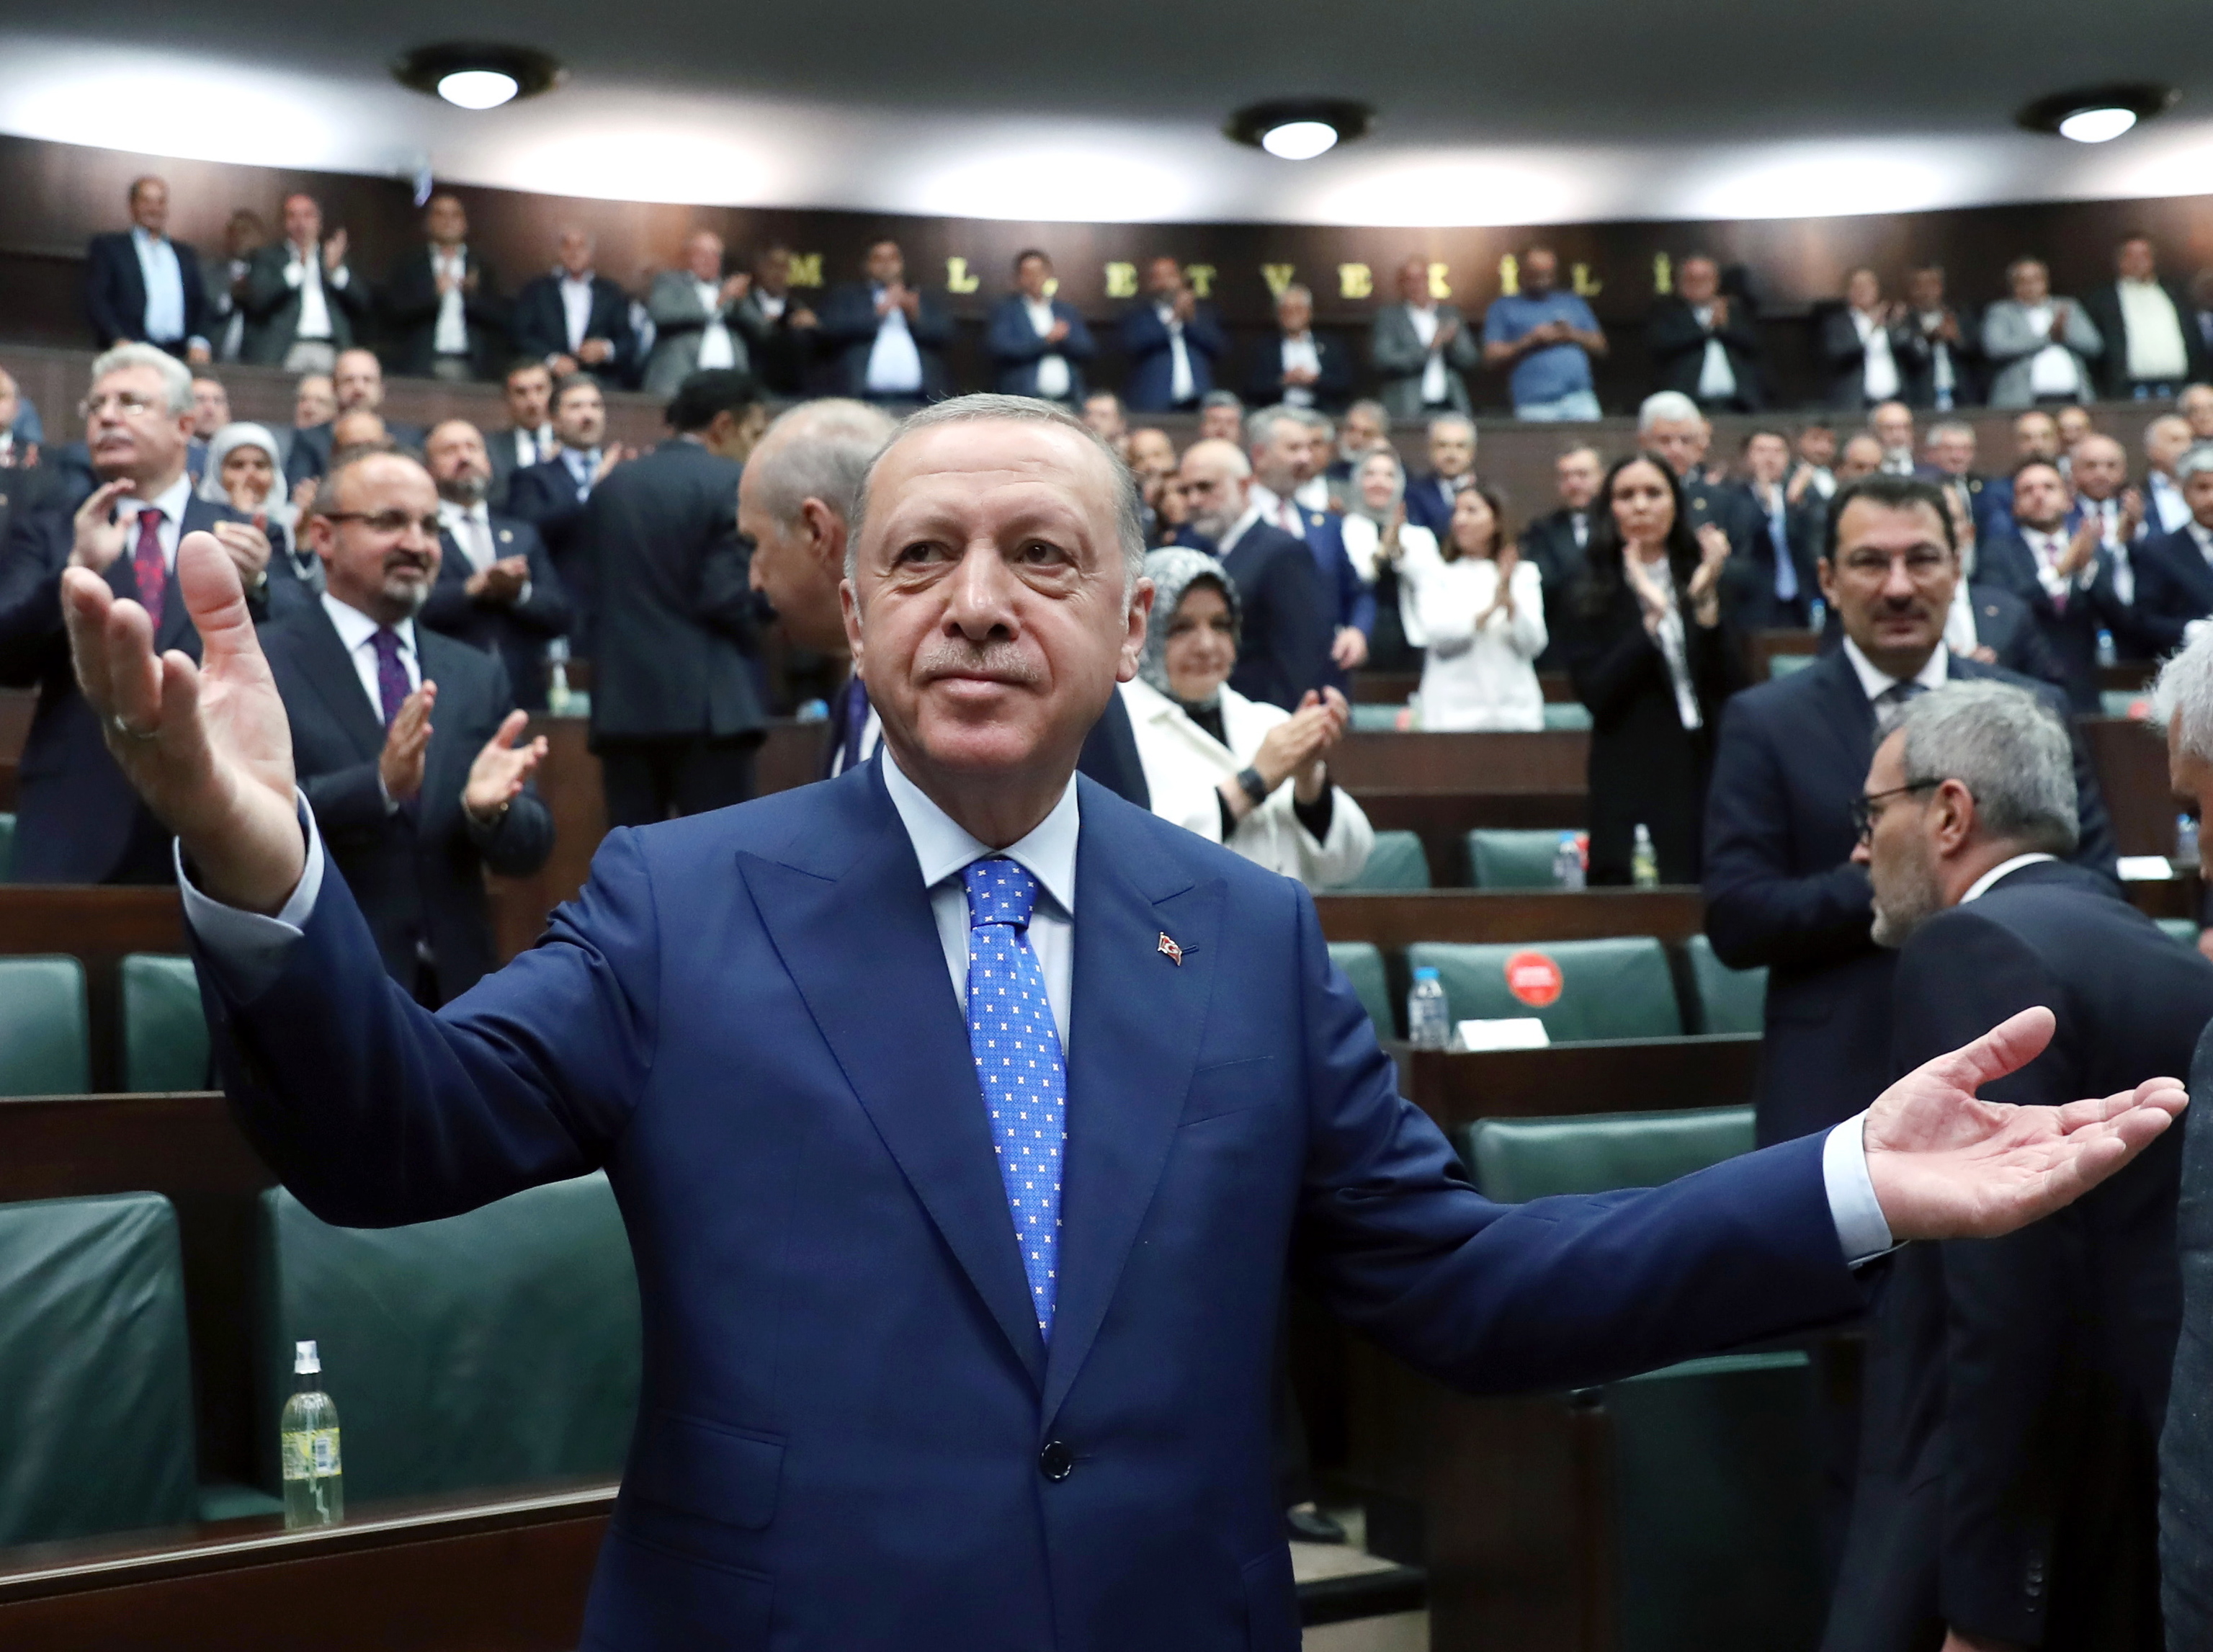 President Erdogan is applauded in the assembly.